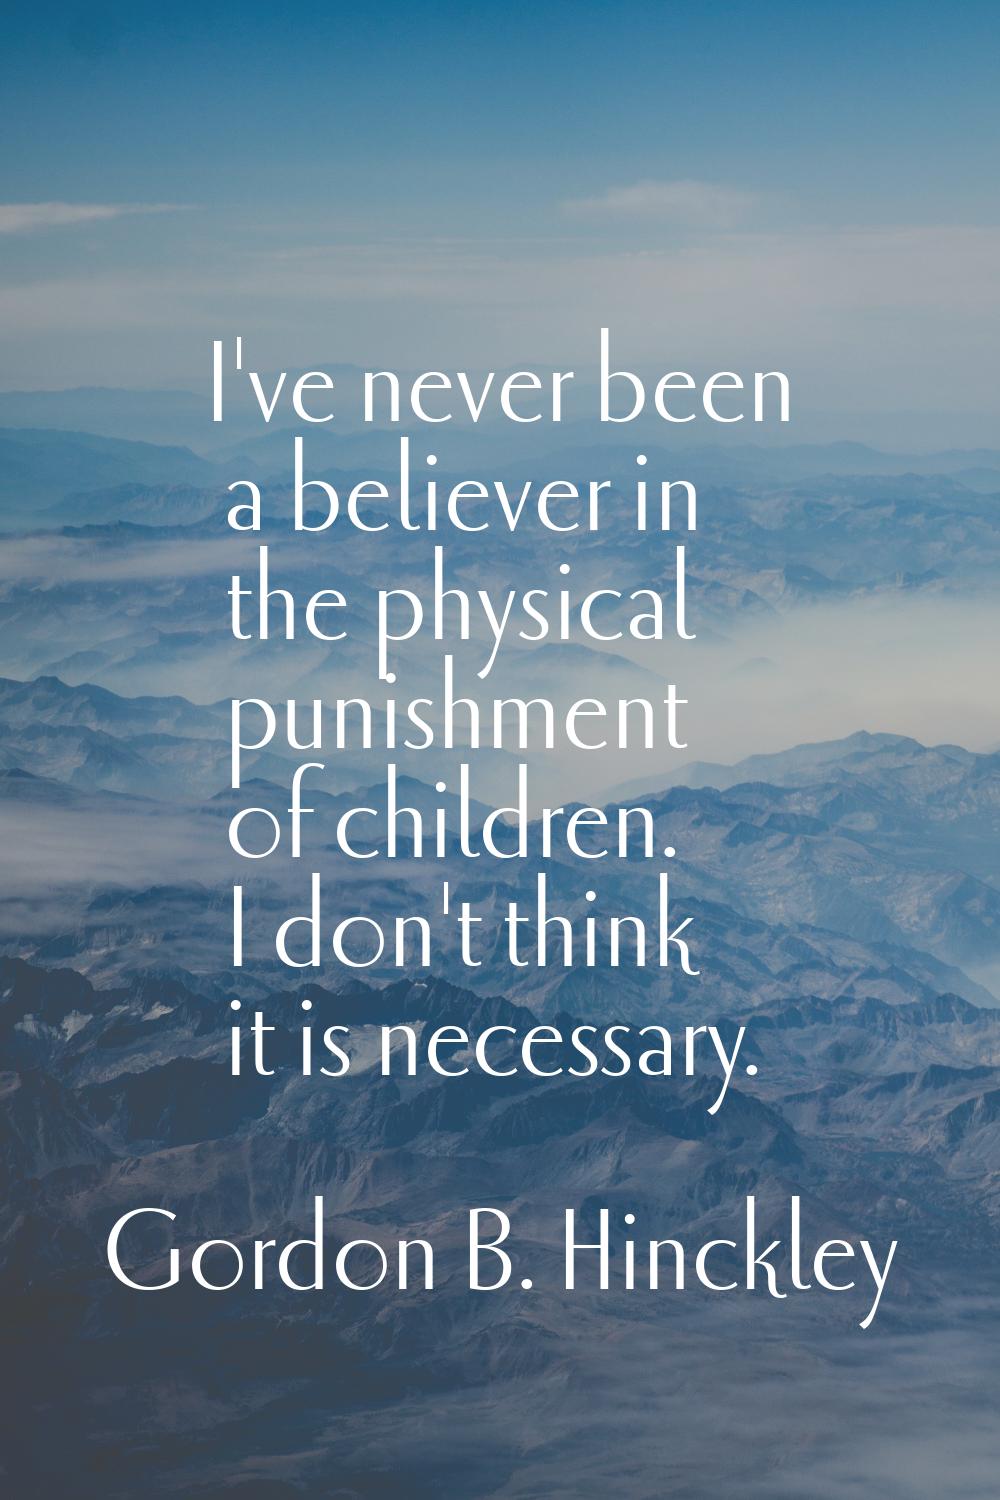 I've never been a believer in the physical punishment of children. I don't think it is necessary.